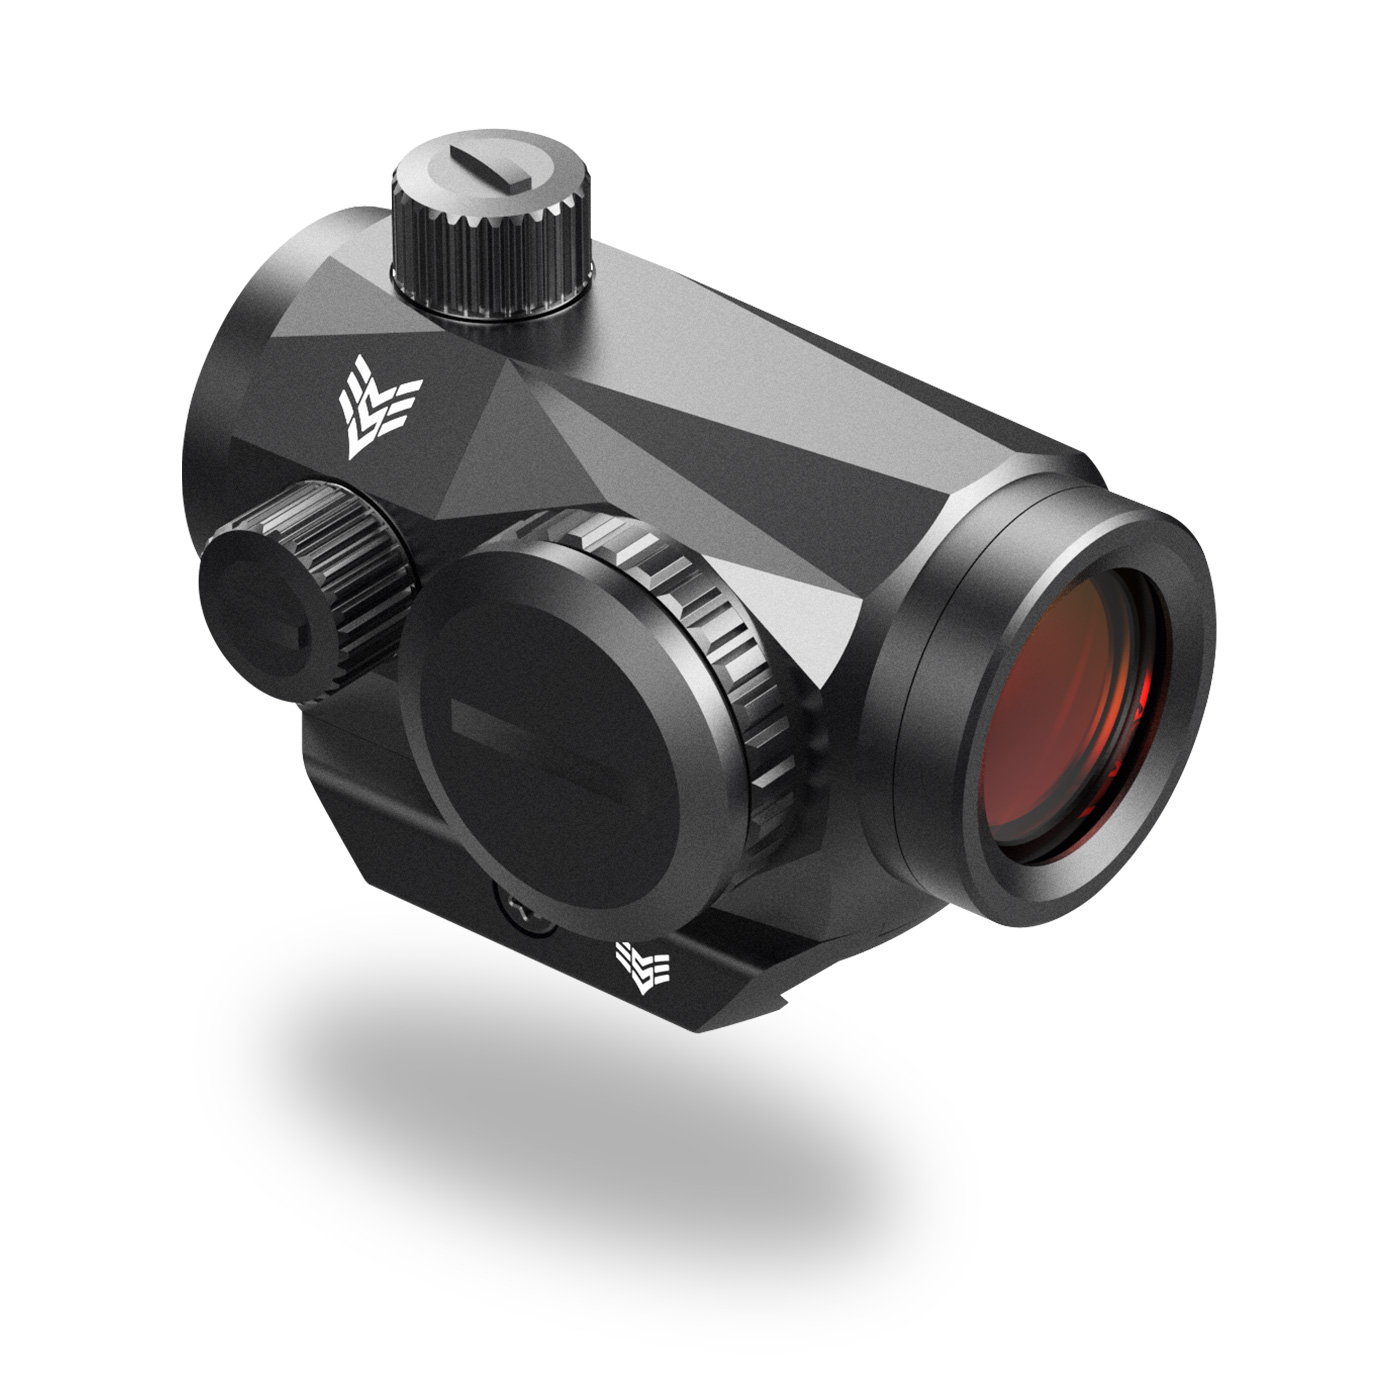 Swampfox Liberator 1x22mm Red Dot Sight | Up to 16% Off 4.6 Star